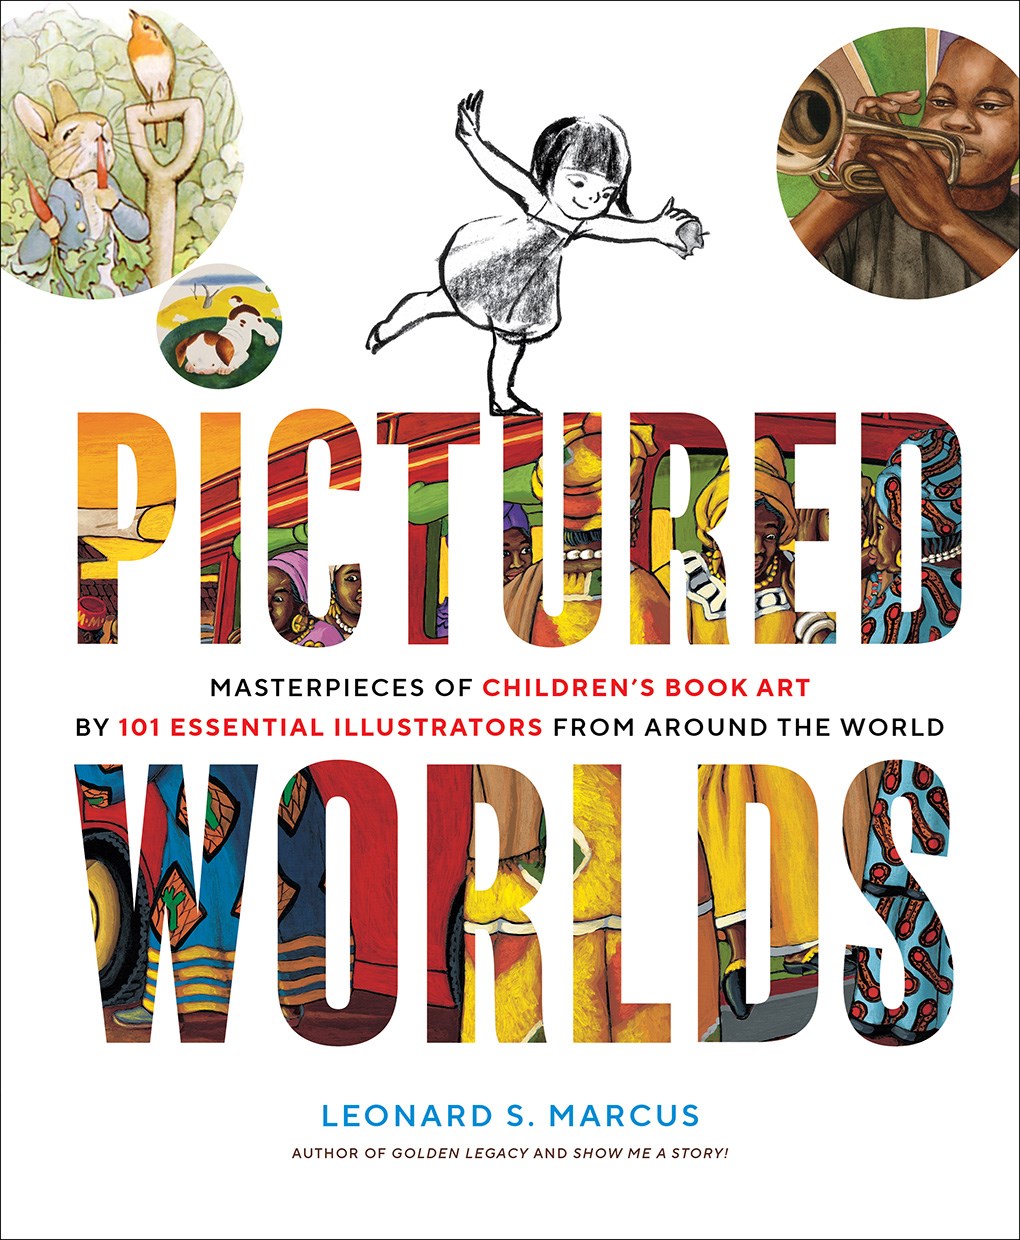 Pictured Worlds: Masterpieces of Children’s Book Art by 101 Essential Illustrators from Around the World